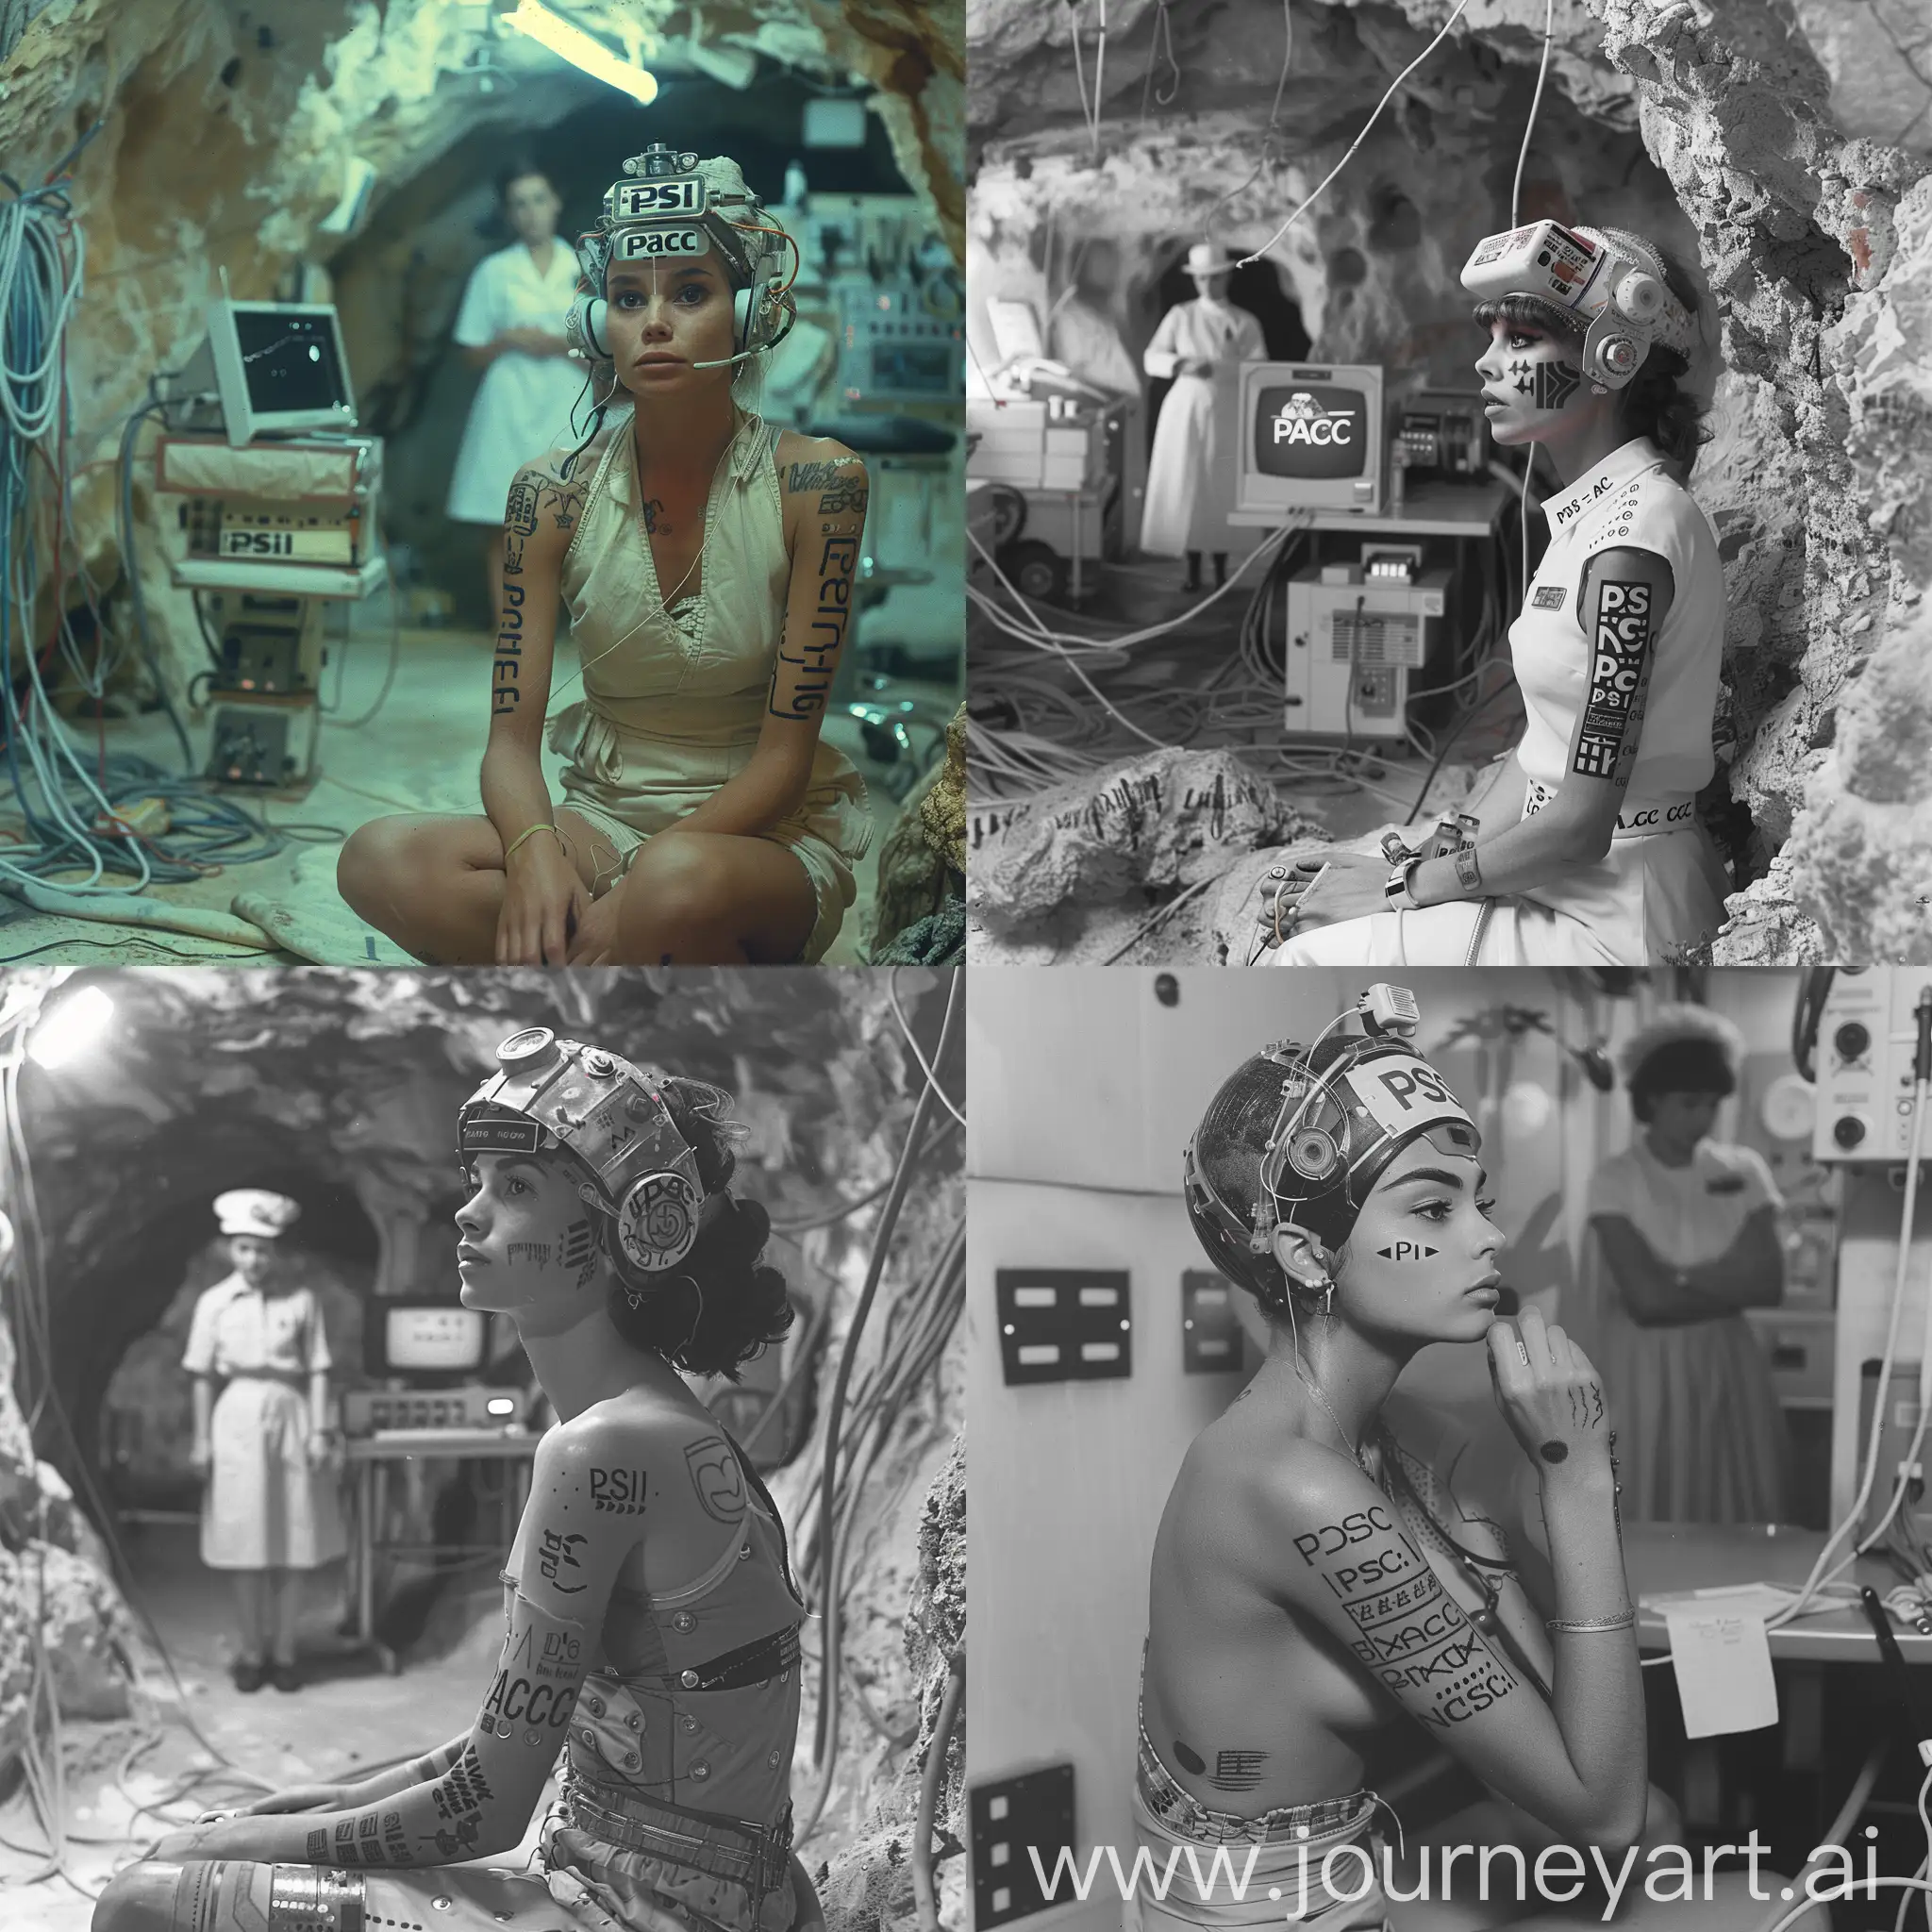 "1967 35mm photography. A small intimate clean brightly lit cave, a futuristic female monk with tattoos that say "psi/acc" wearing a headgear with to register brainwaves device, various tech equipment and wires in the background, the word PSI/acc on the computer screen ,sitting next to brainwave register monitor. a human  in a maids uniform  Is guarding in the background --s 750 --v 6.0"